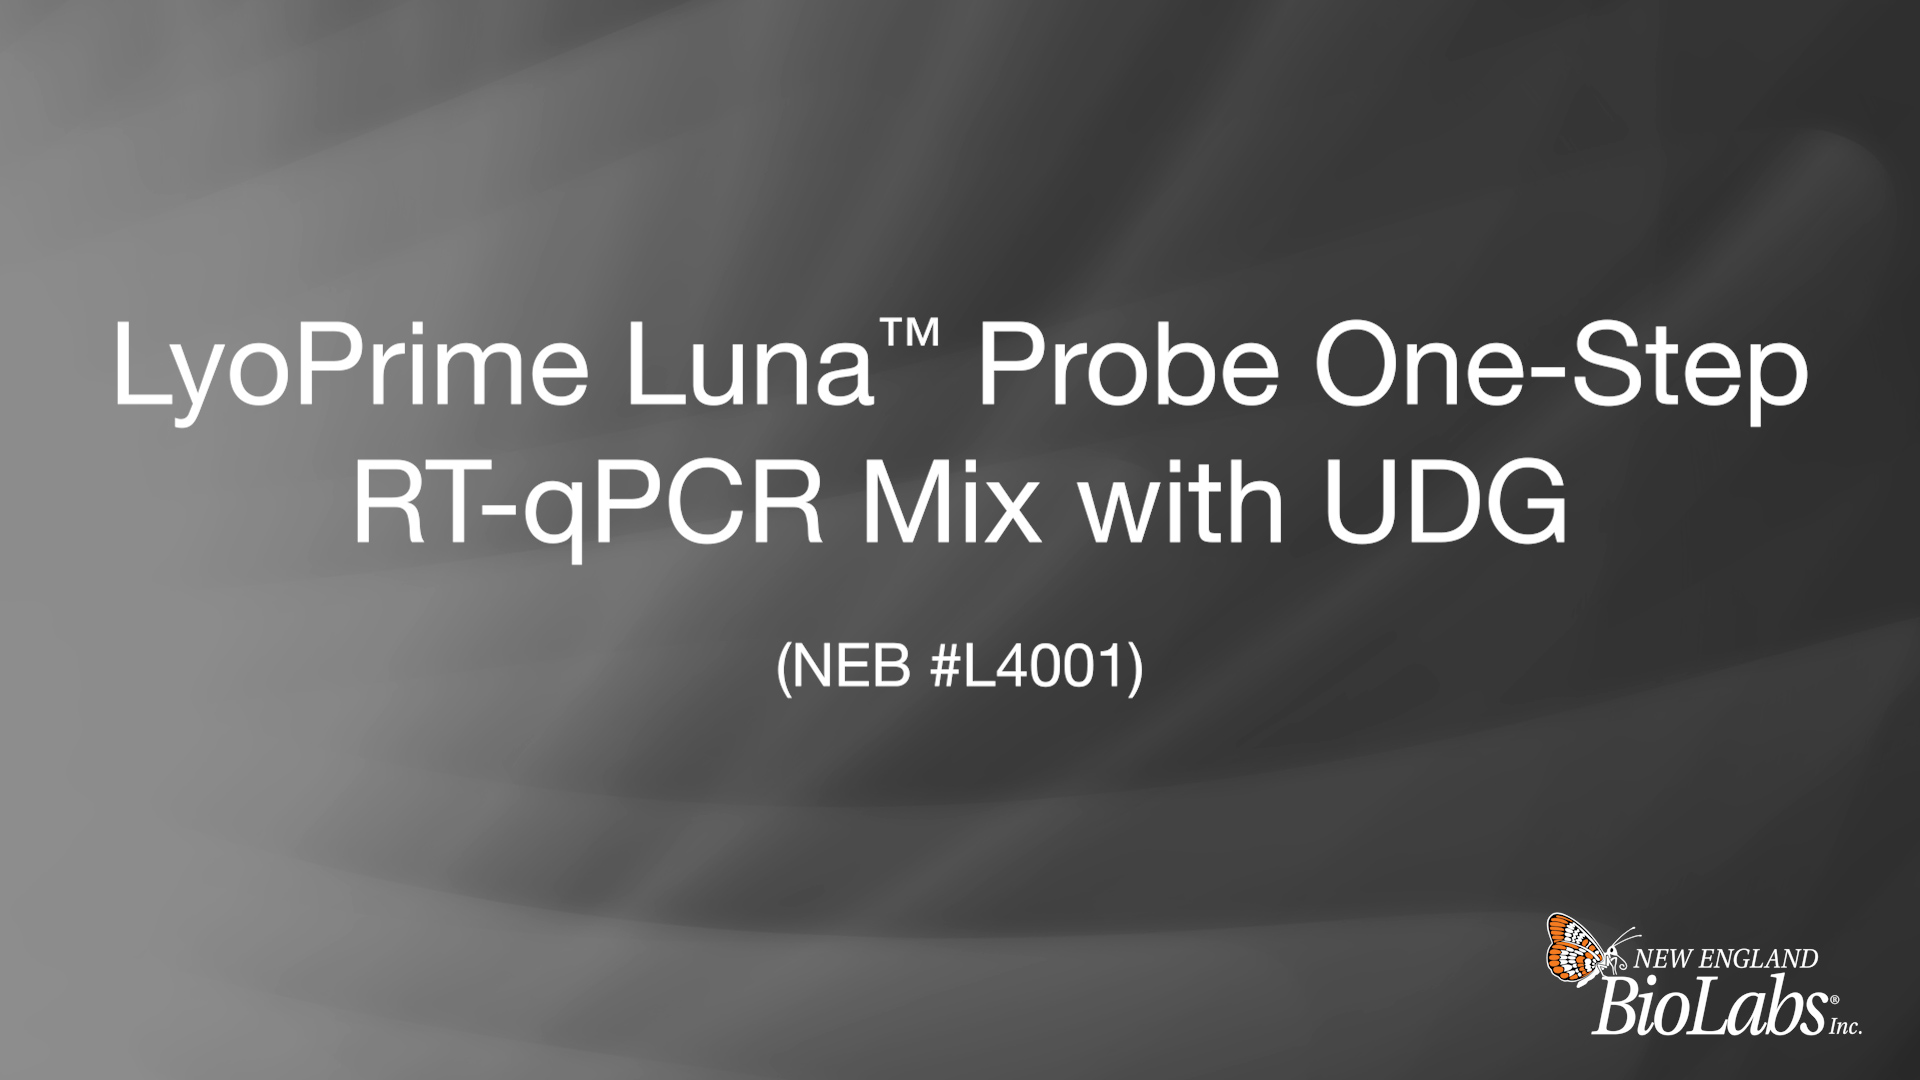 LyoPrime Luna™ Probe One-Step RT-qPCR Mix with UDG |